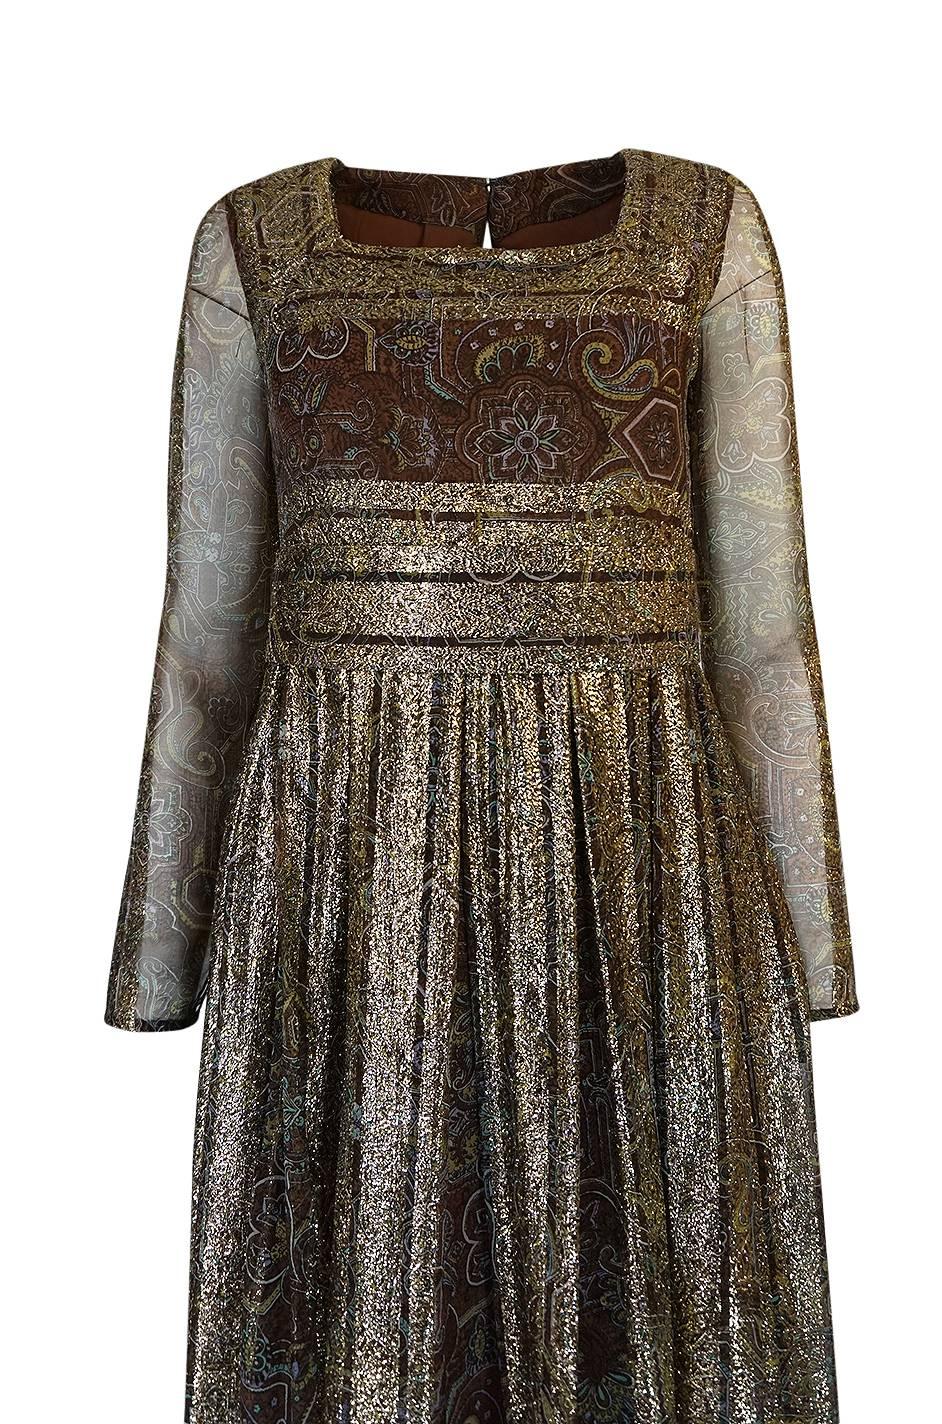 Christian Dior by Marc Bohan Demi-Couture Gold and Printed Silk Dress, c 1968 2